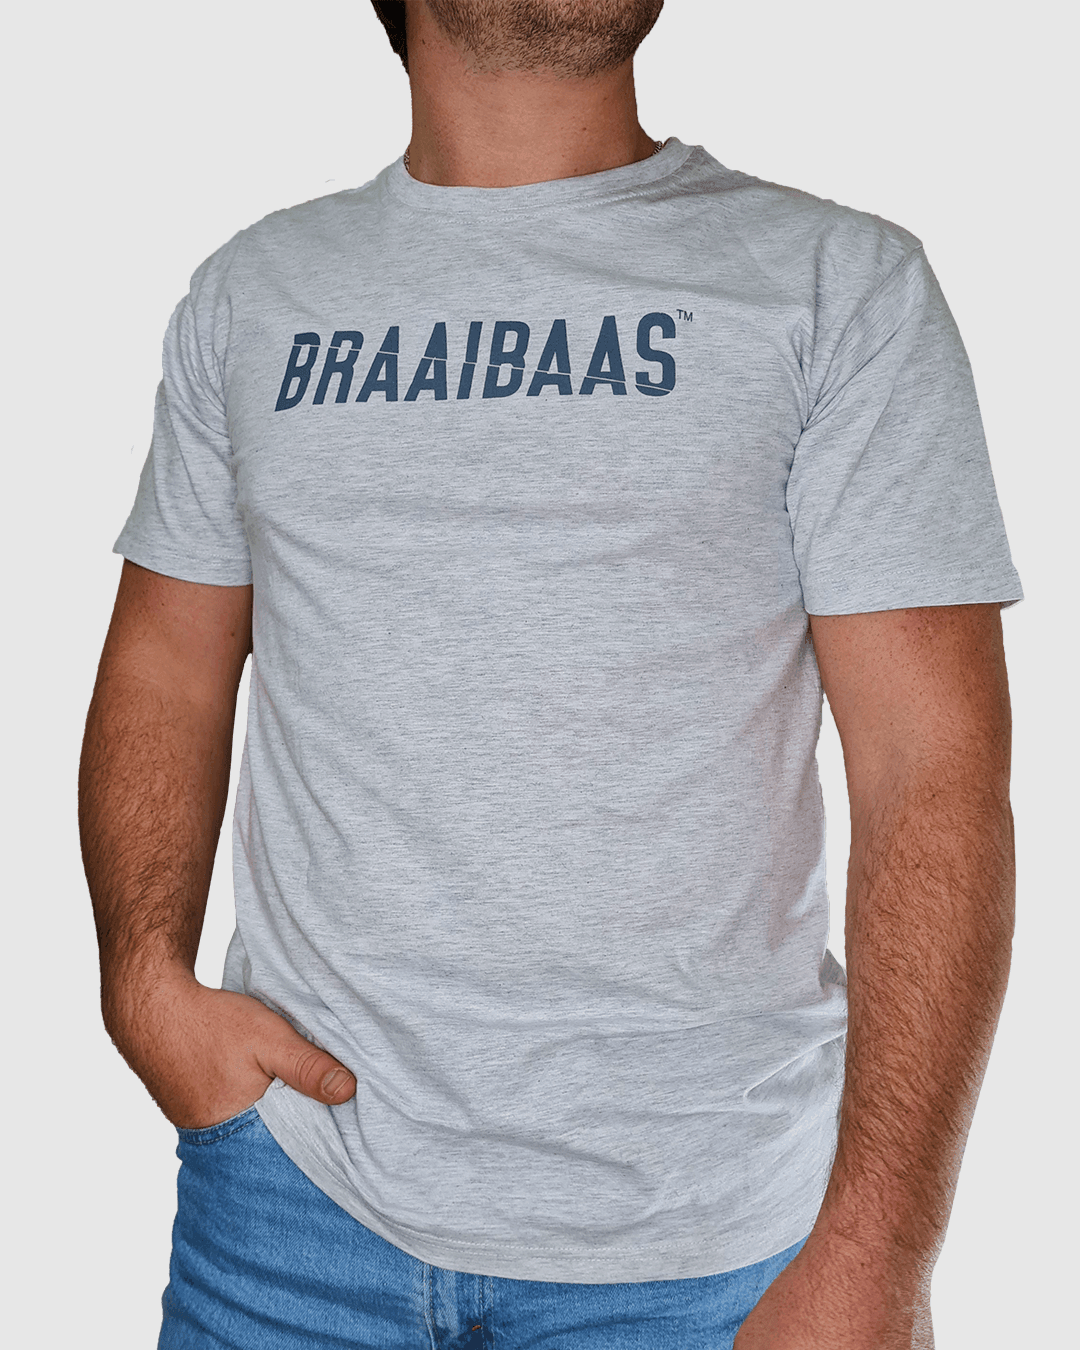 the braaibaas proud baas mens and womens t-shirts in melange grey and light grey